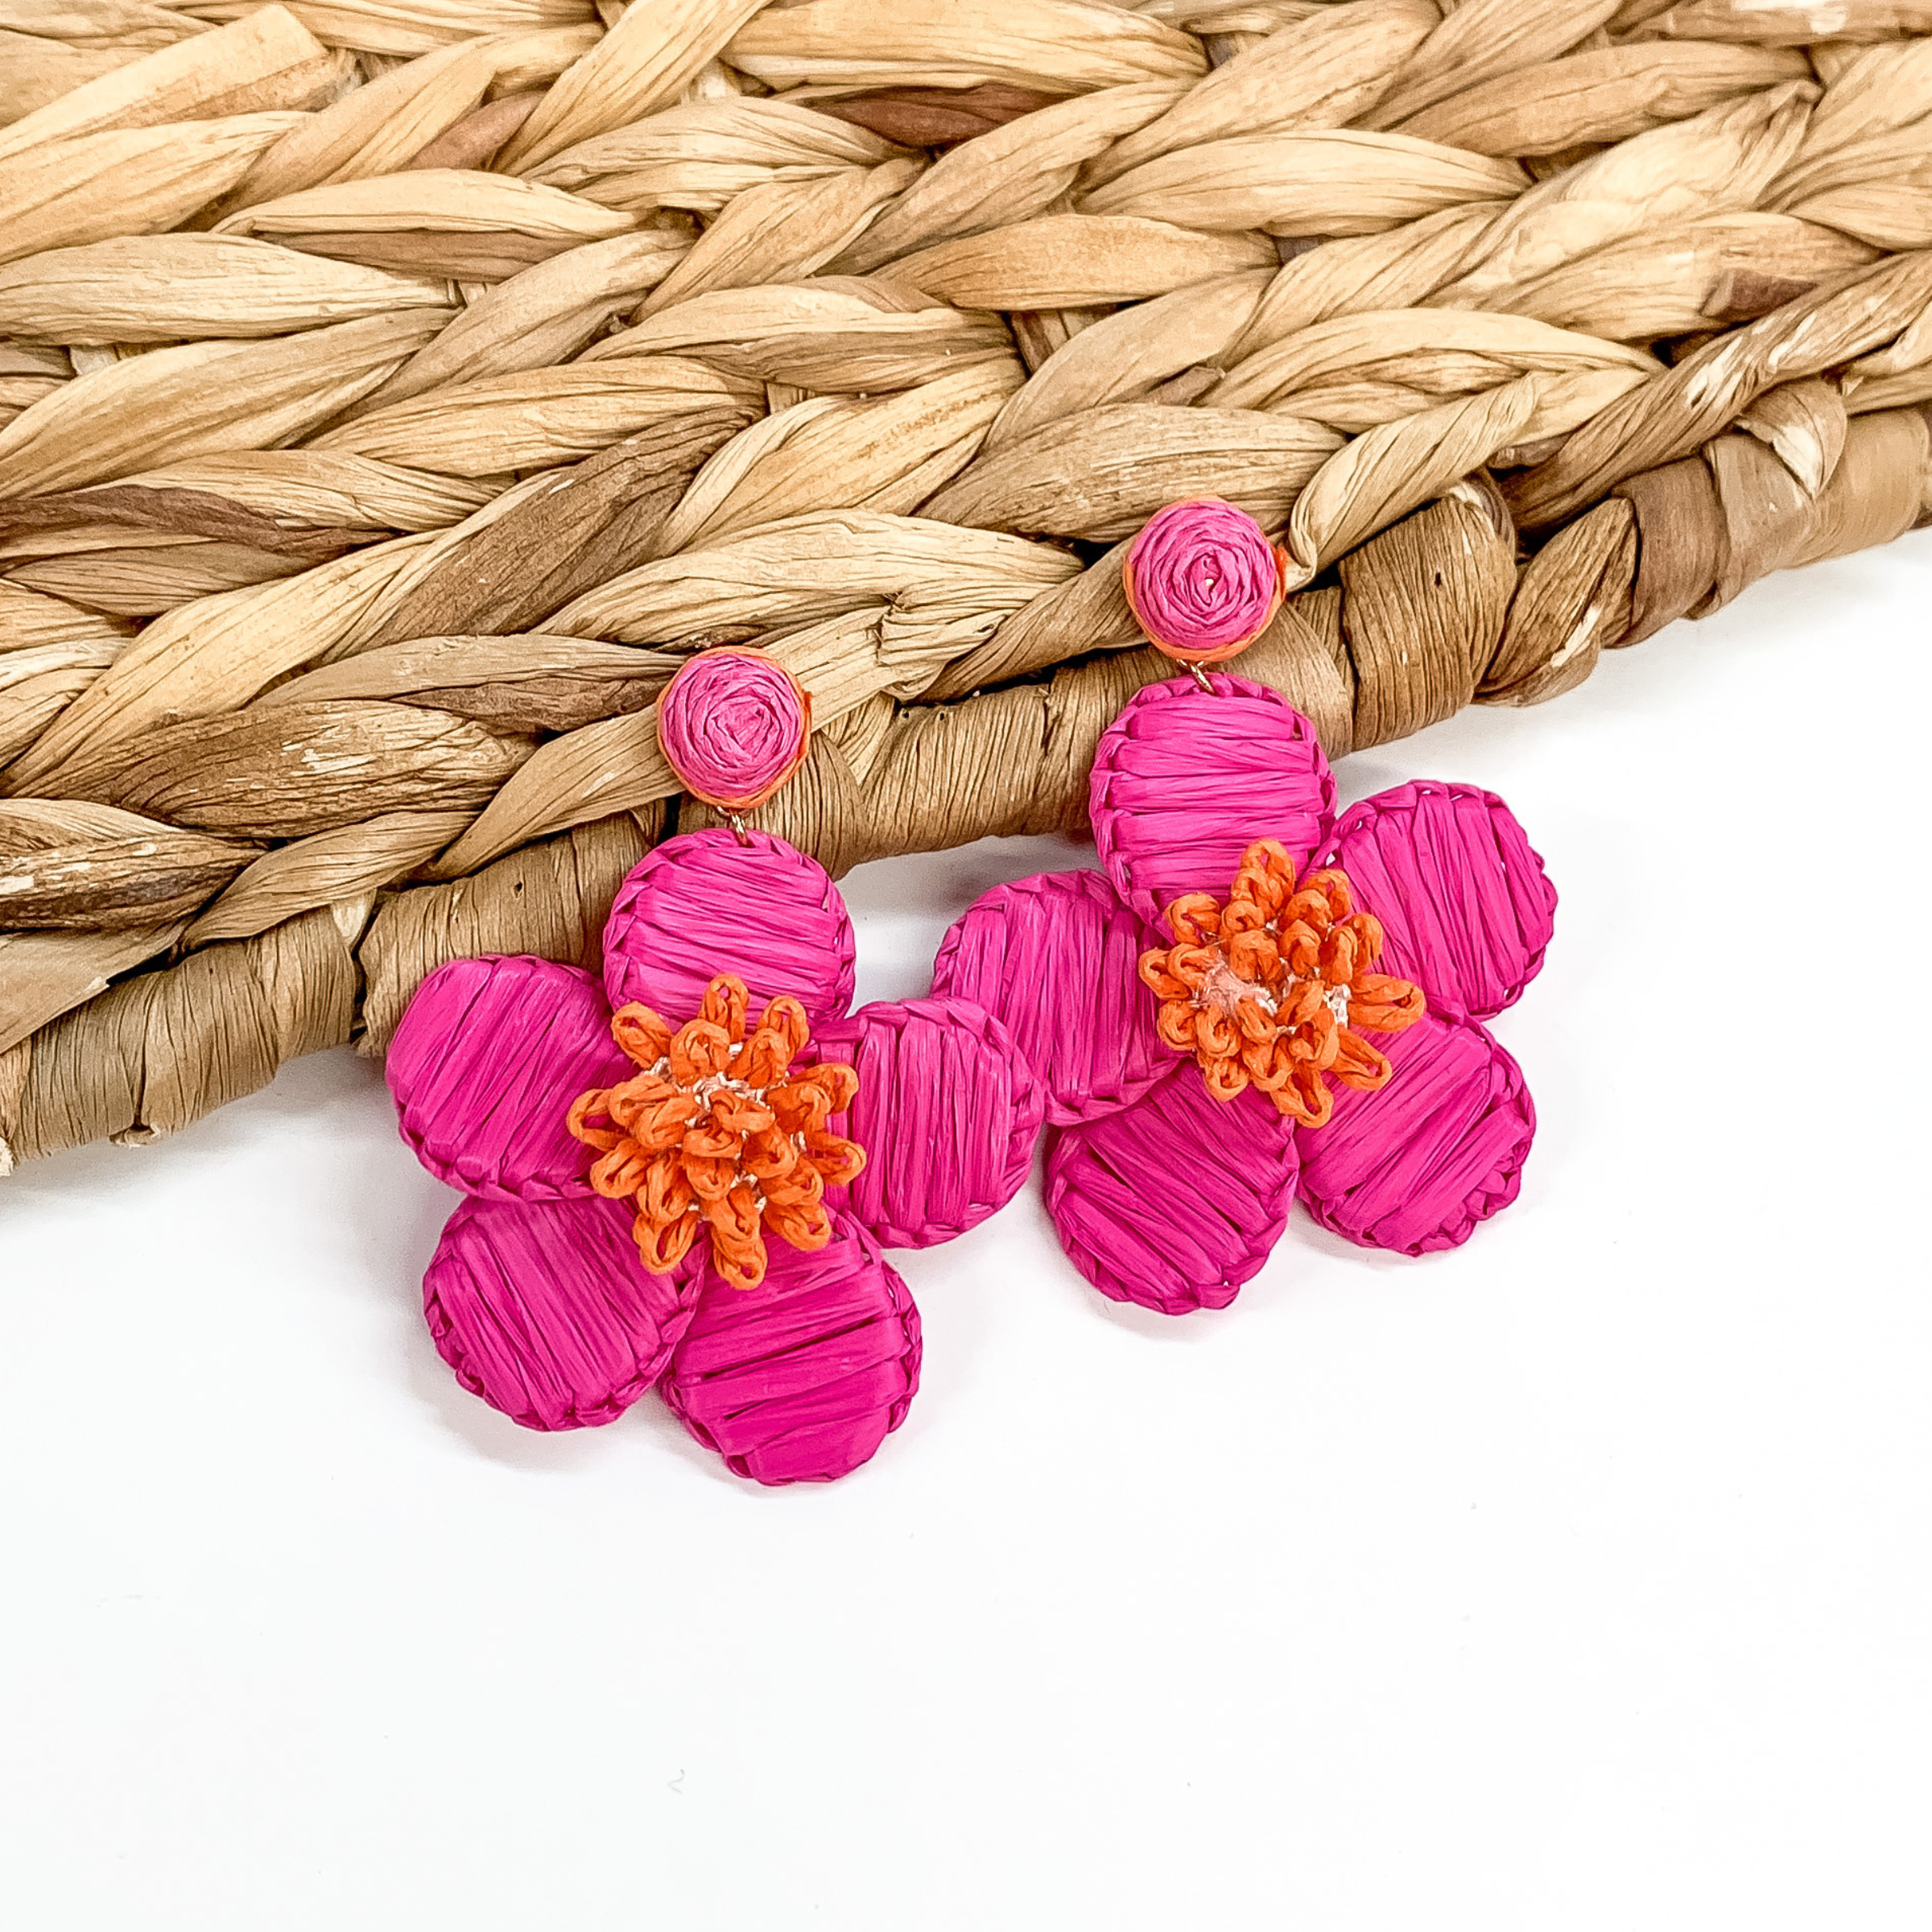 Hot pink affia wrapped circle studs with hanging flower pendant wrapped in hot pink  raffia and orange colored middle. These earrings are pictured partially laying on a basket weave material on a white background. 